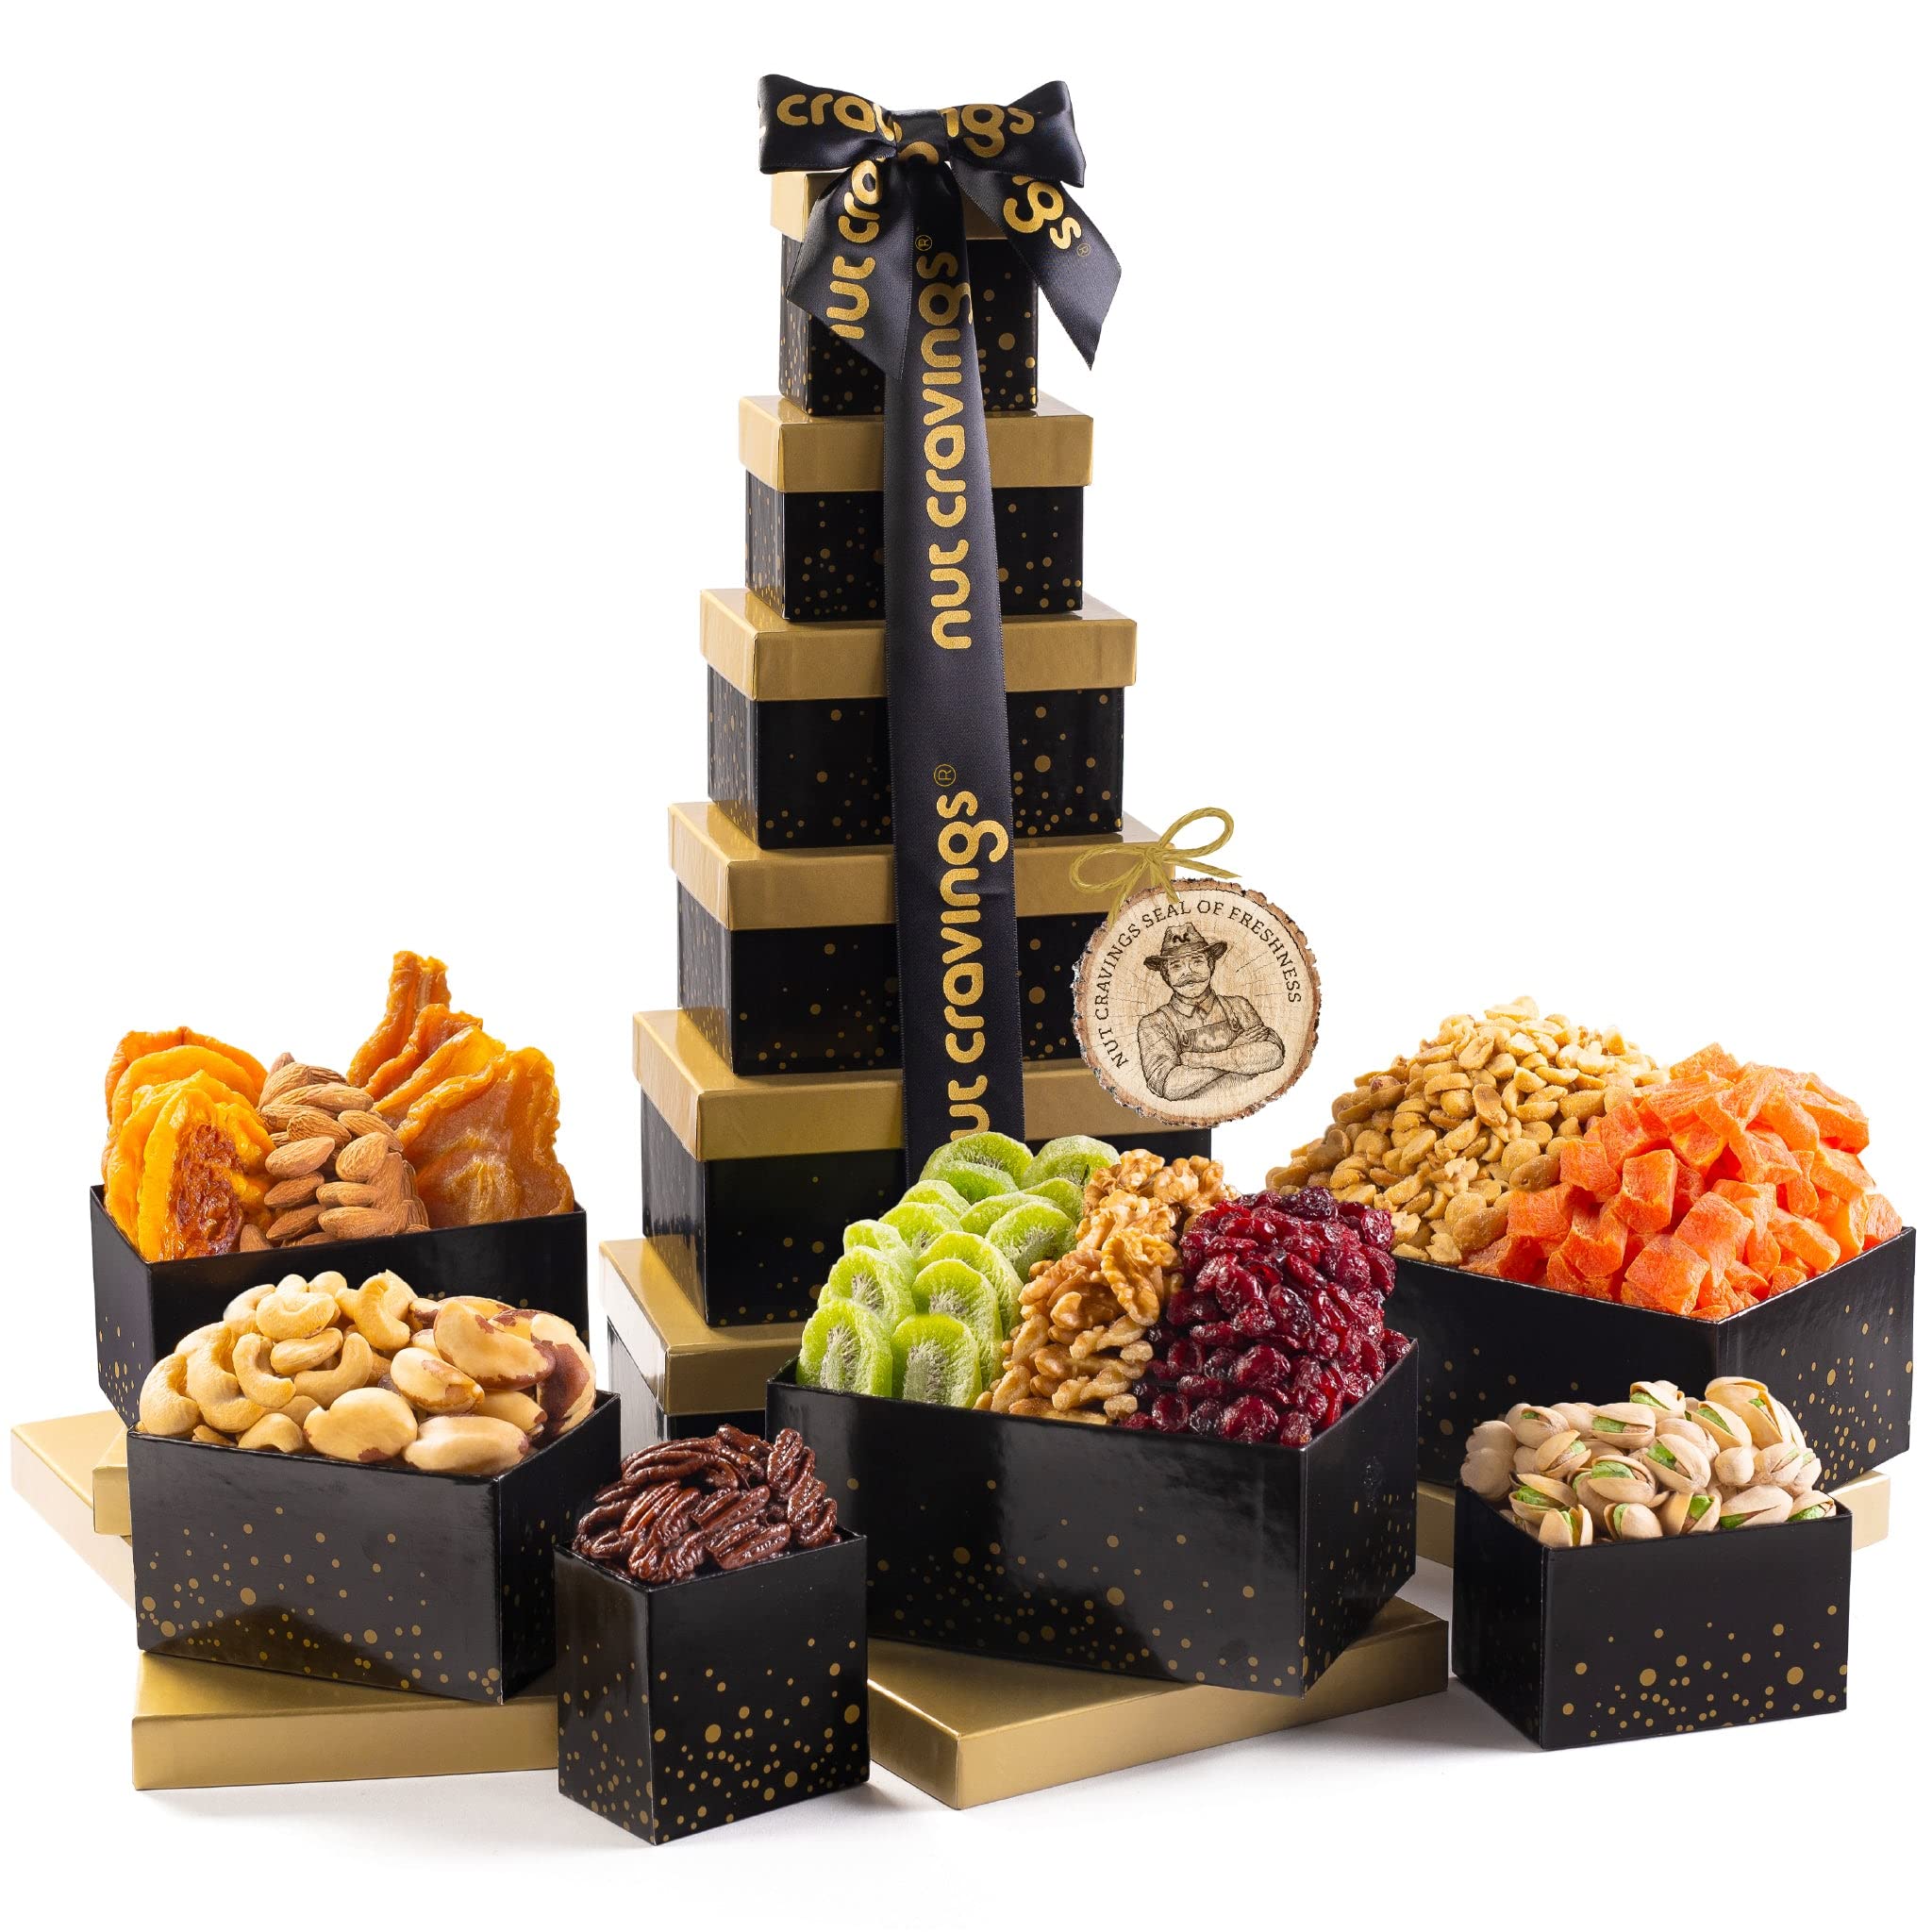 Williams Sonoma Dried Fruit & Nut Gift Box | CoolSprings Galleria